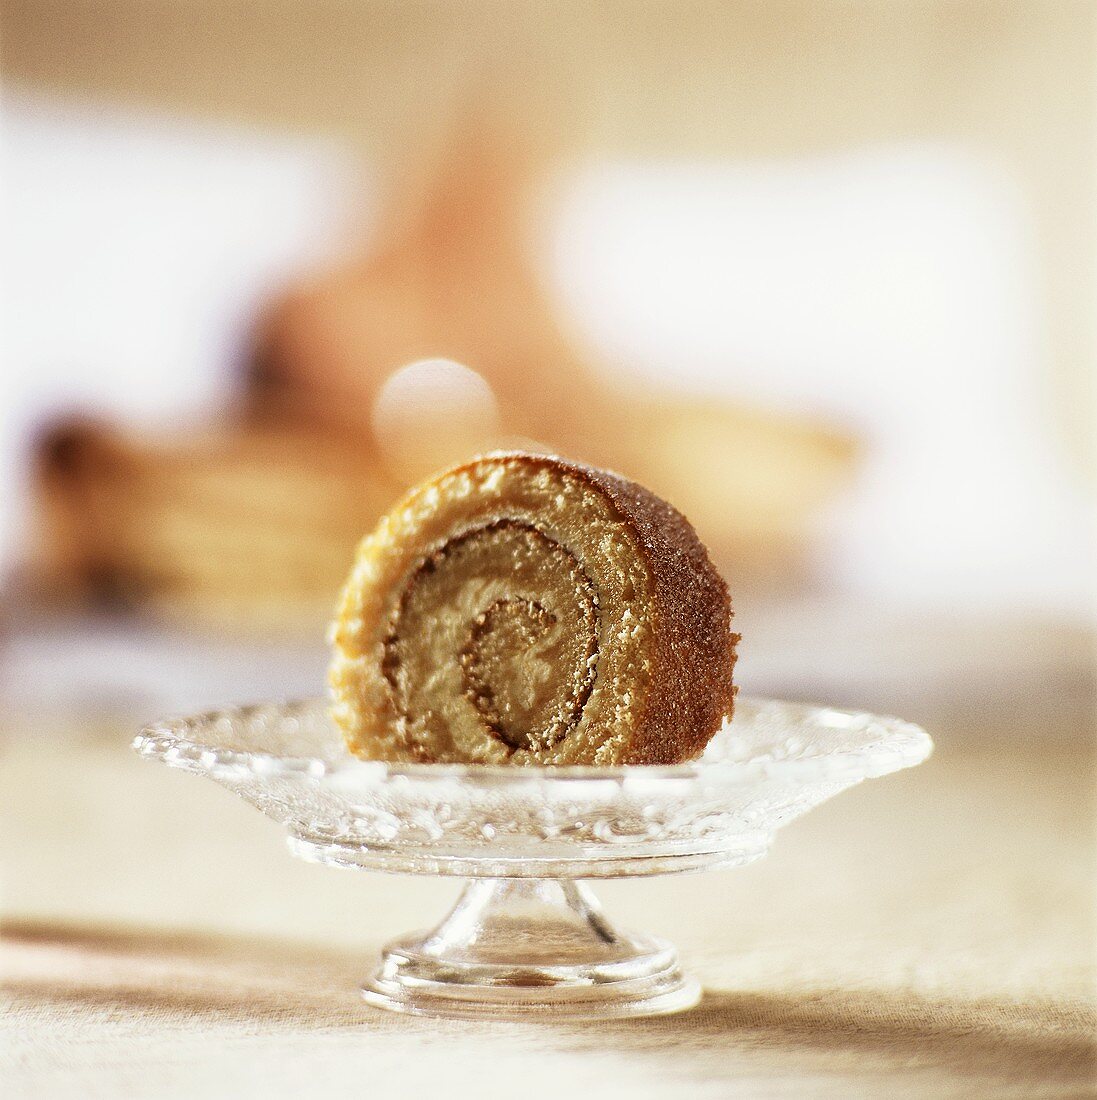 Sponge roulade with apple filling